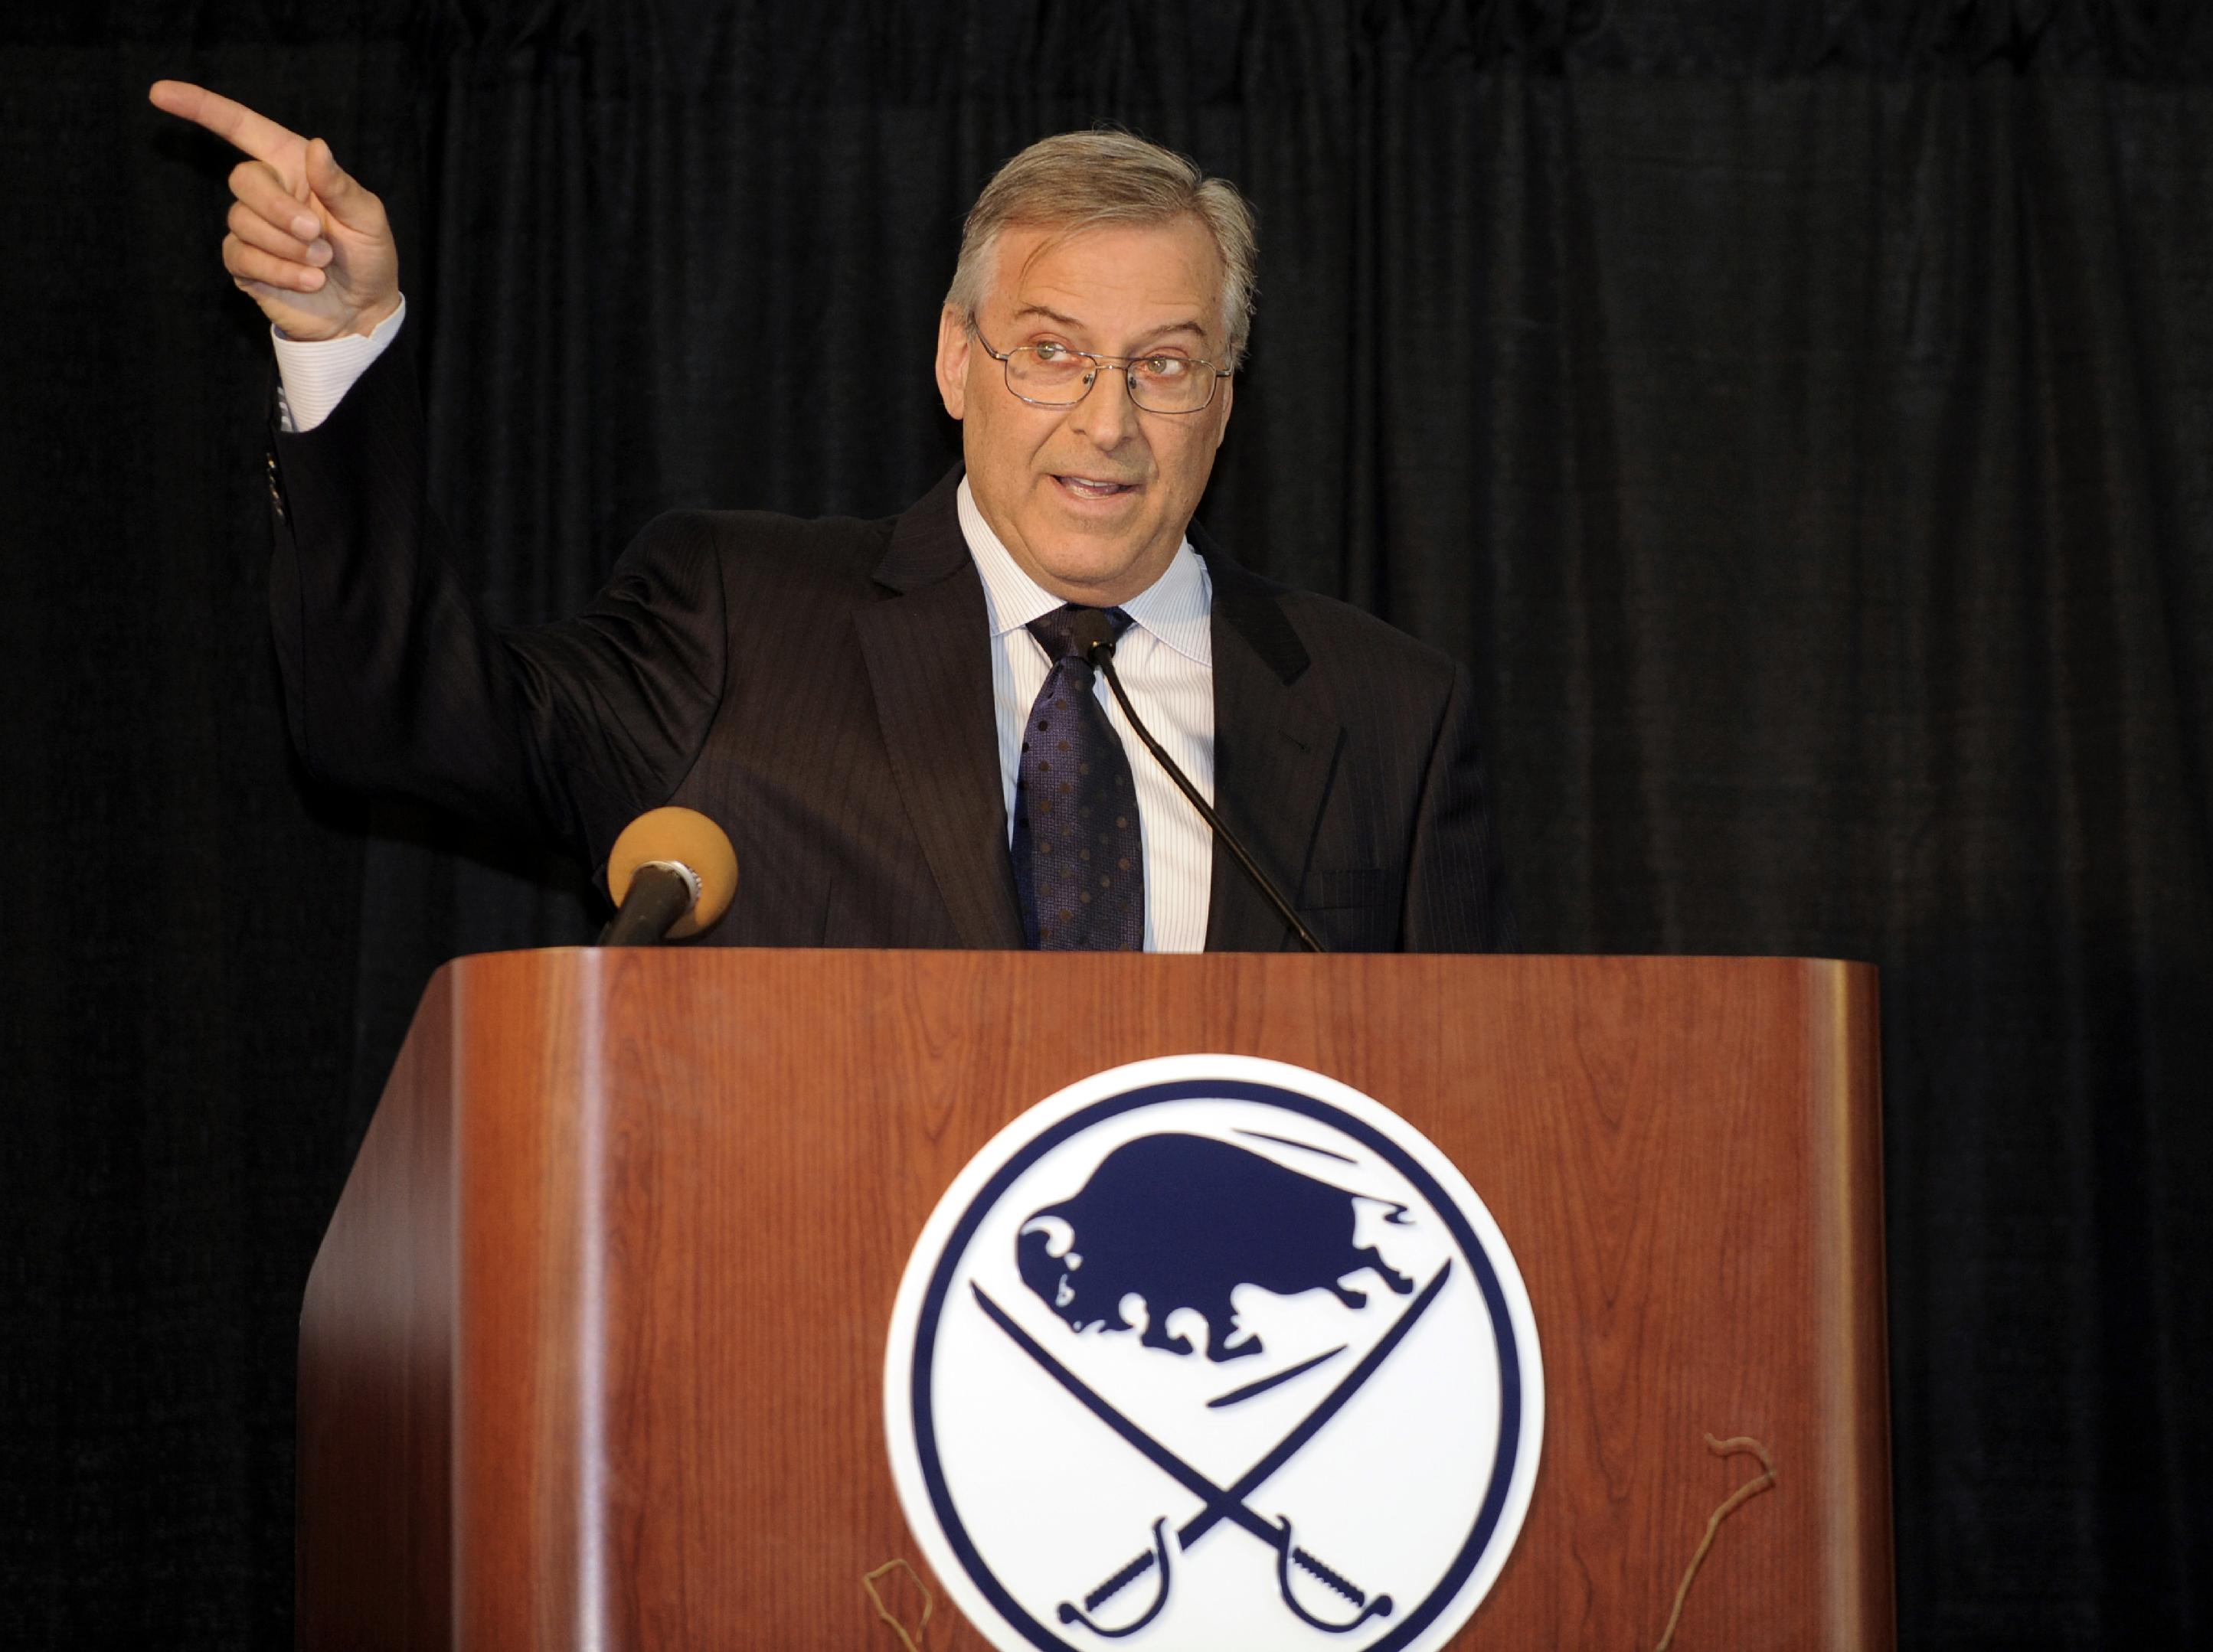 Buffalo Sabres' owner Terry Pegula, gestures toward the First Niagara Center and explains development plans during groundbreaking ceremonies before an NHL hockey game against the Philadelphia Flyers in Buffalo, N.Y., Saturday, April 13, 2013. (AP Photo/Gary Wiepert)